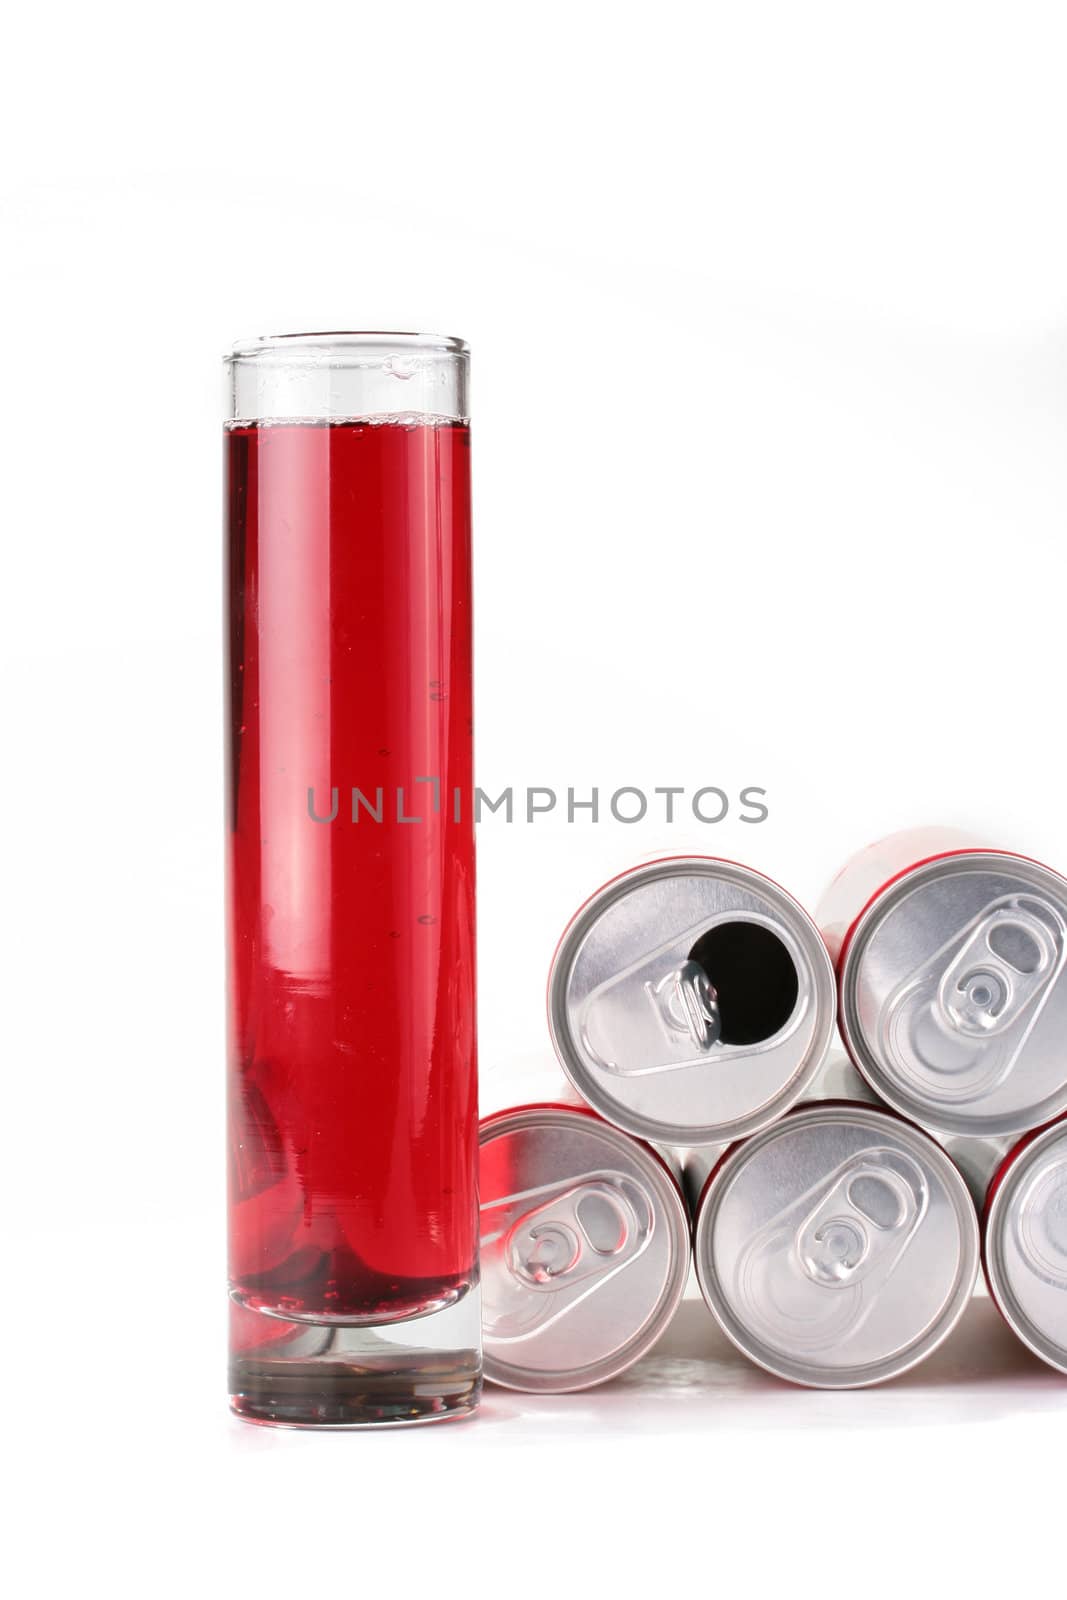 The high glass narrow glass with a drink of red colour and containers from a tin in which is stored this drink.